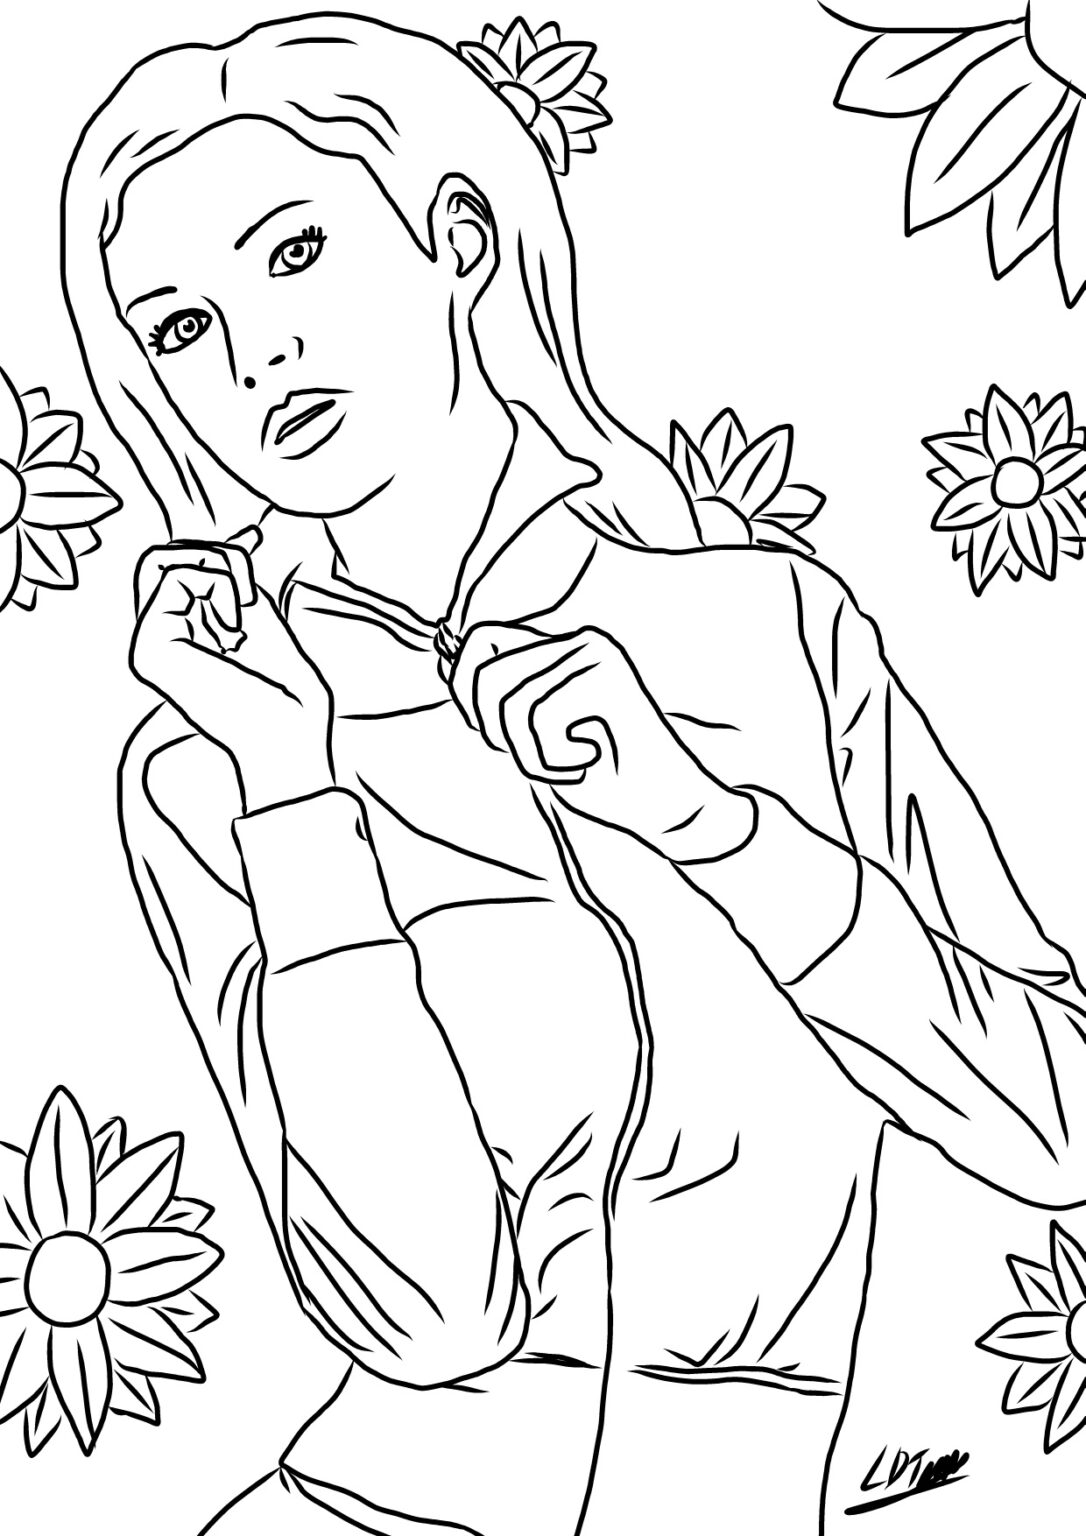 Free People Coloring Pages Pdf - Coloringfolder.com